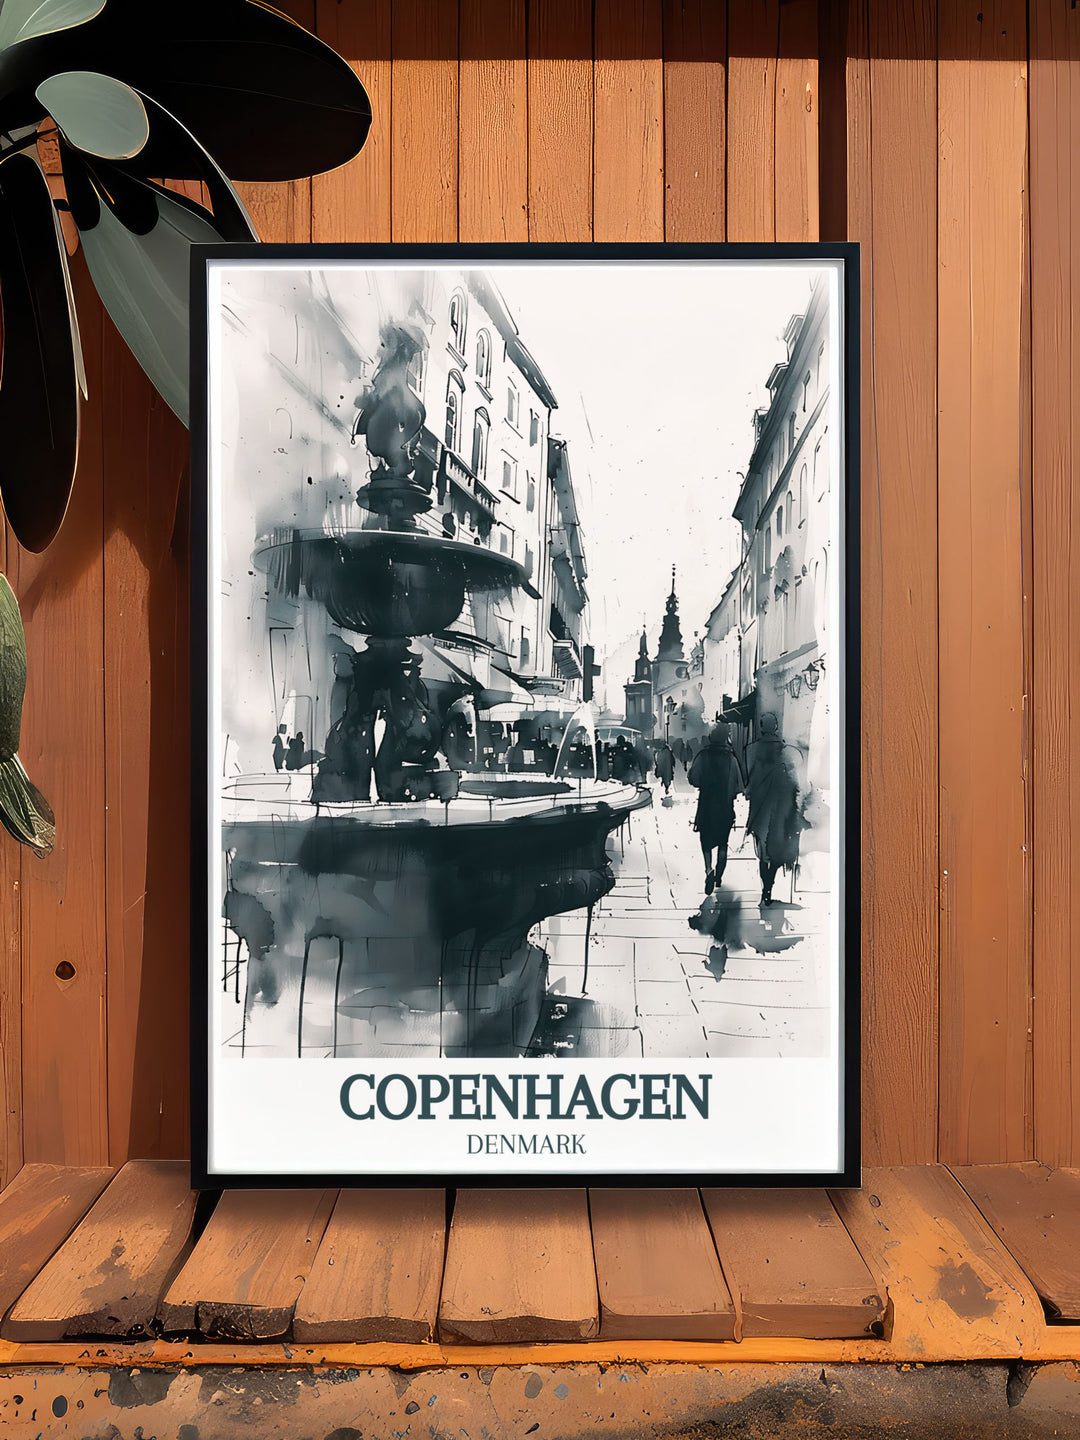 Bring the iconic views of Stroget street, Stork Fountain into your home with this captivating Copenhagen photo. Perfect for enhancing your decor and celebrating the rich culture and beauty of Denmarks famous street. An excellent gift for art lovers and travelers.